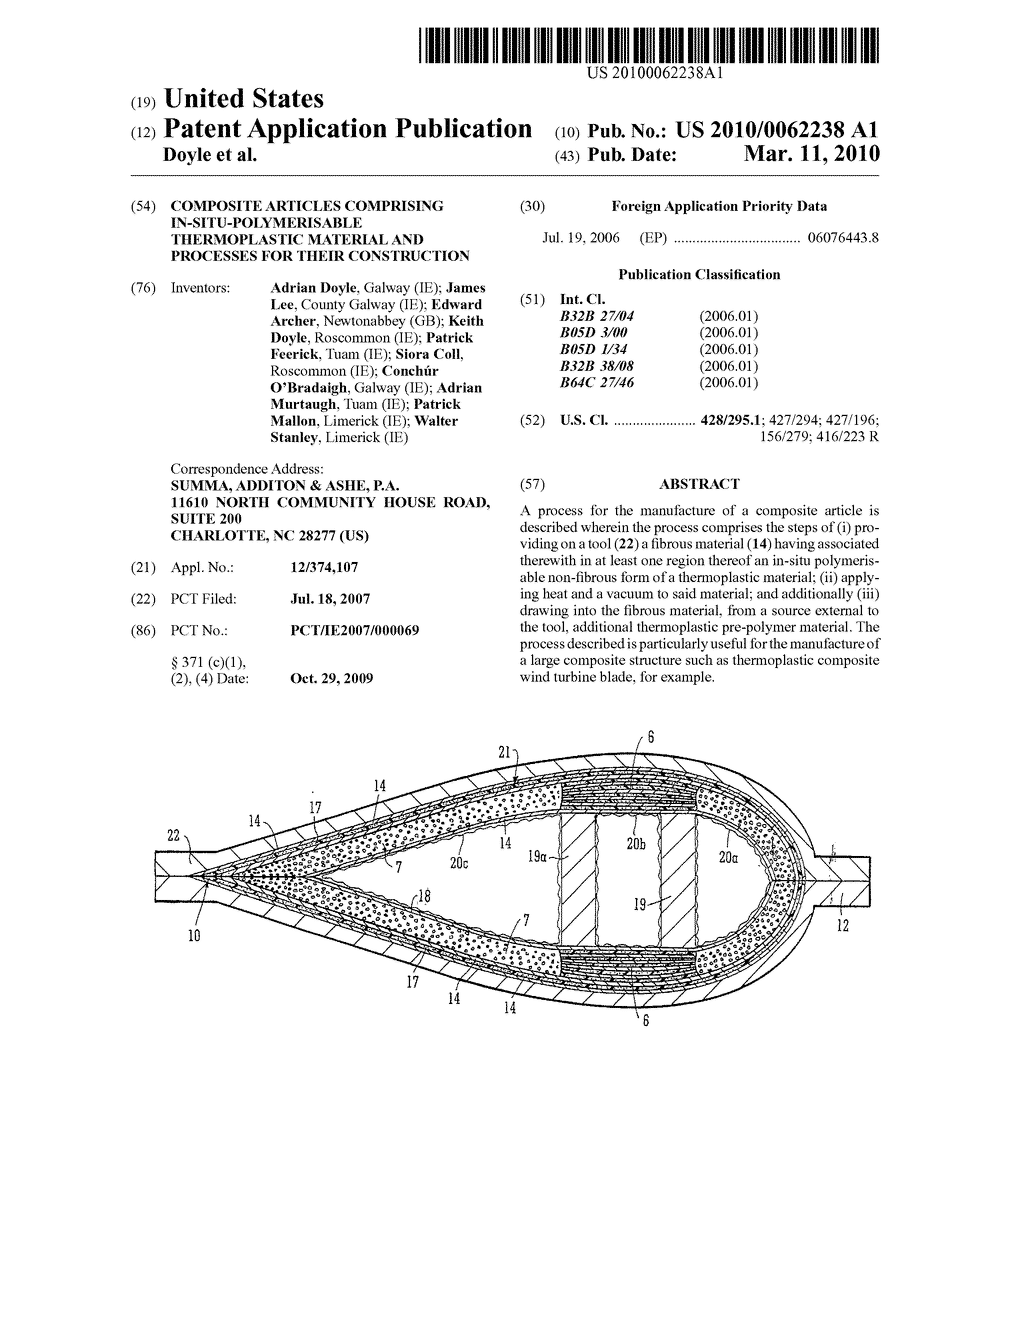 Composite Articles Comprising In-Situ-Polymerisable Thermoplastic Material and Processes for their Construction - diagram, schematic, and image 01